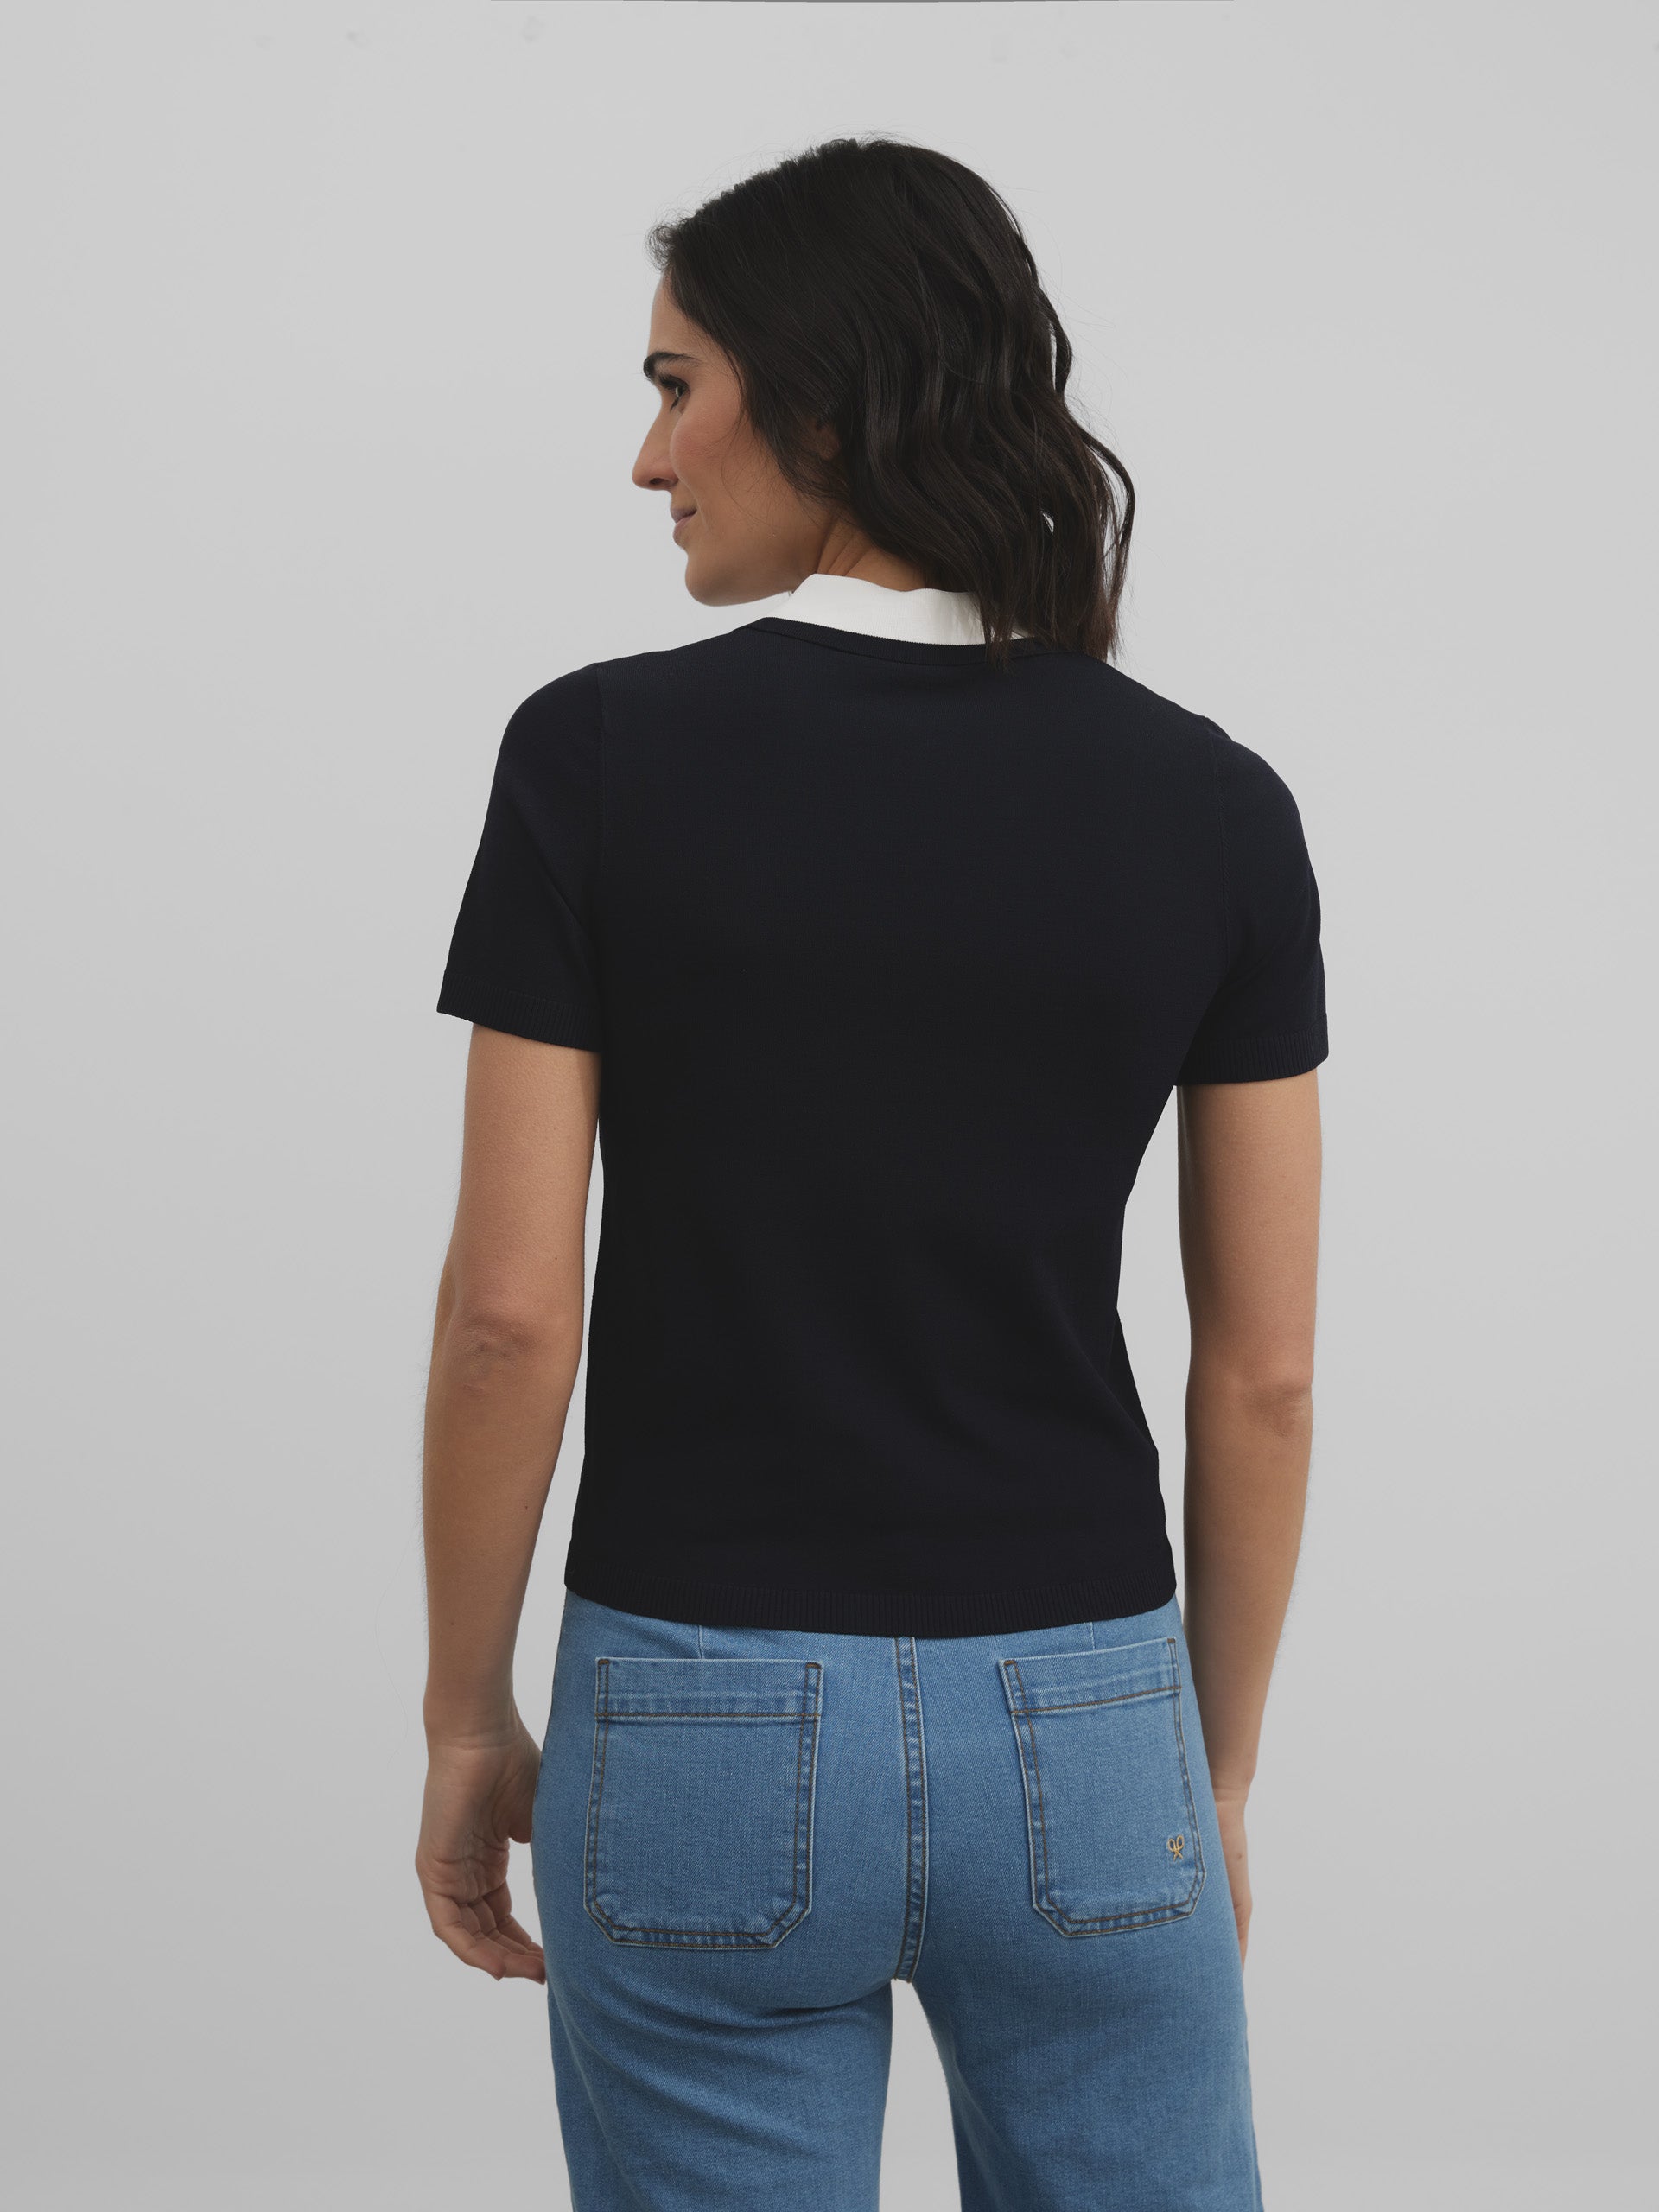 Women's Silbon knit polo with navy buttons